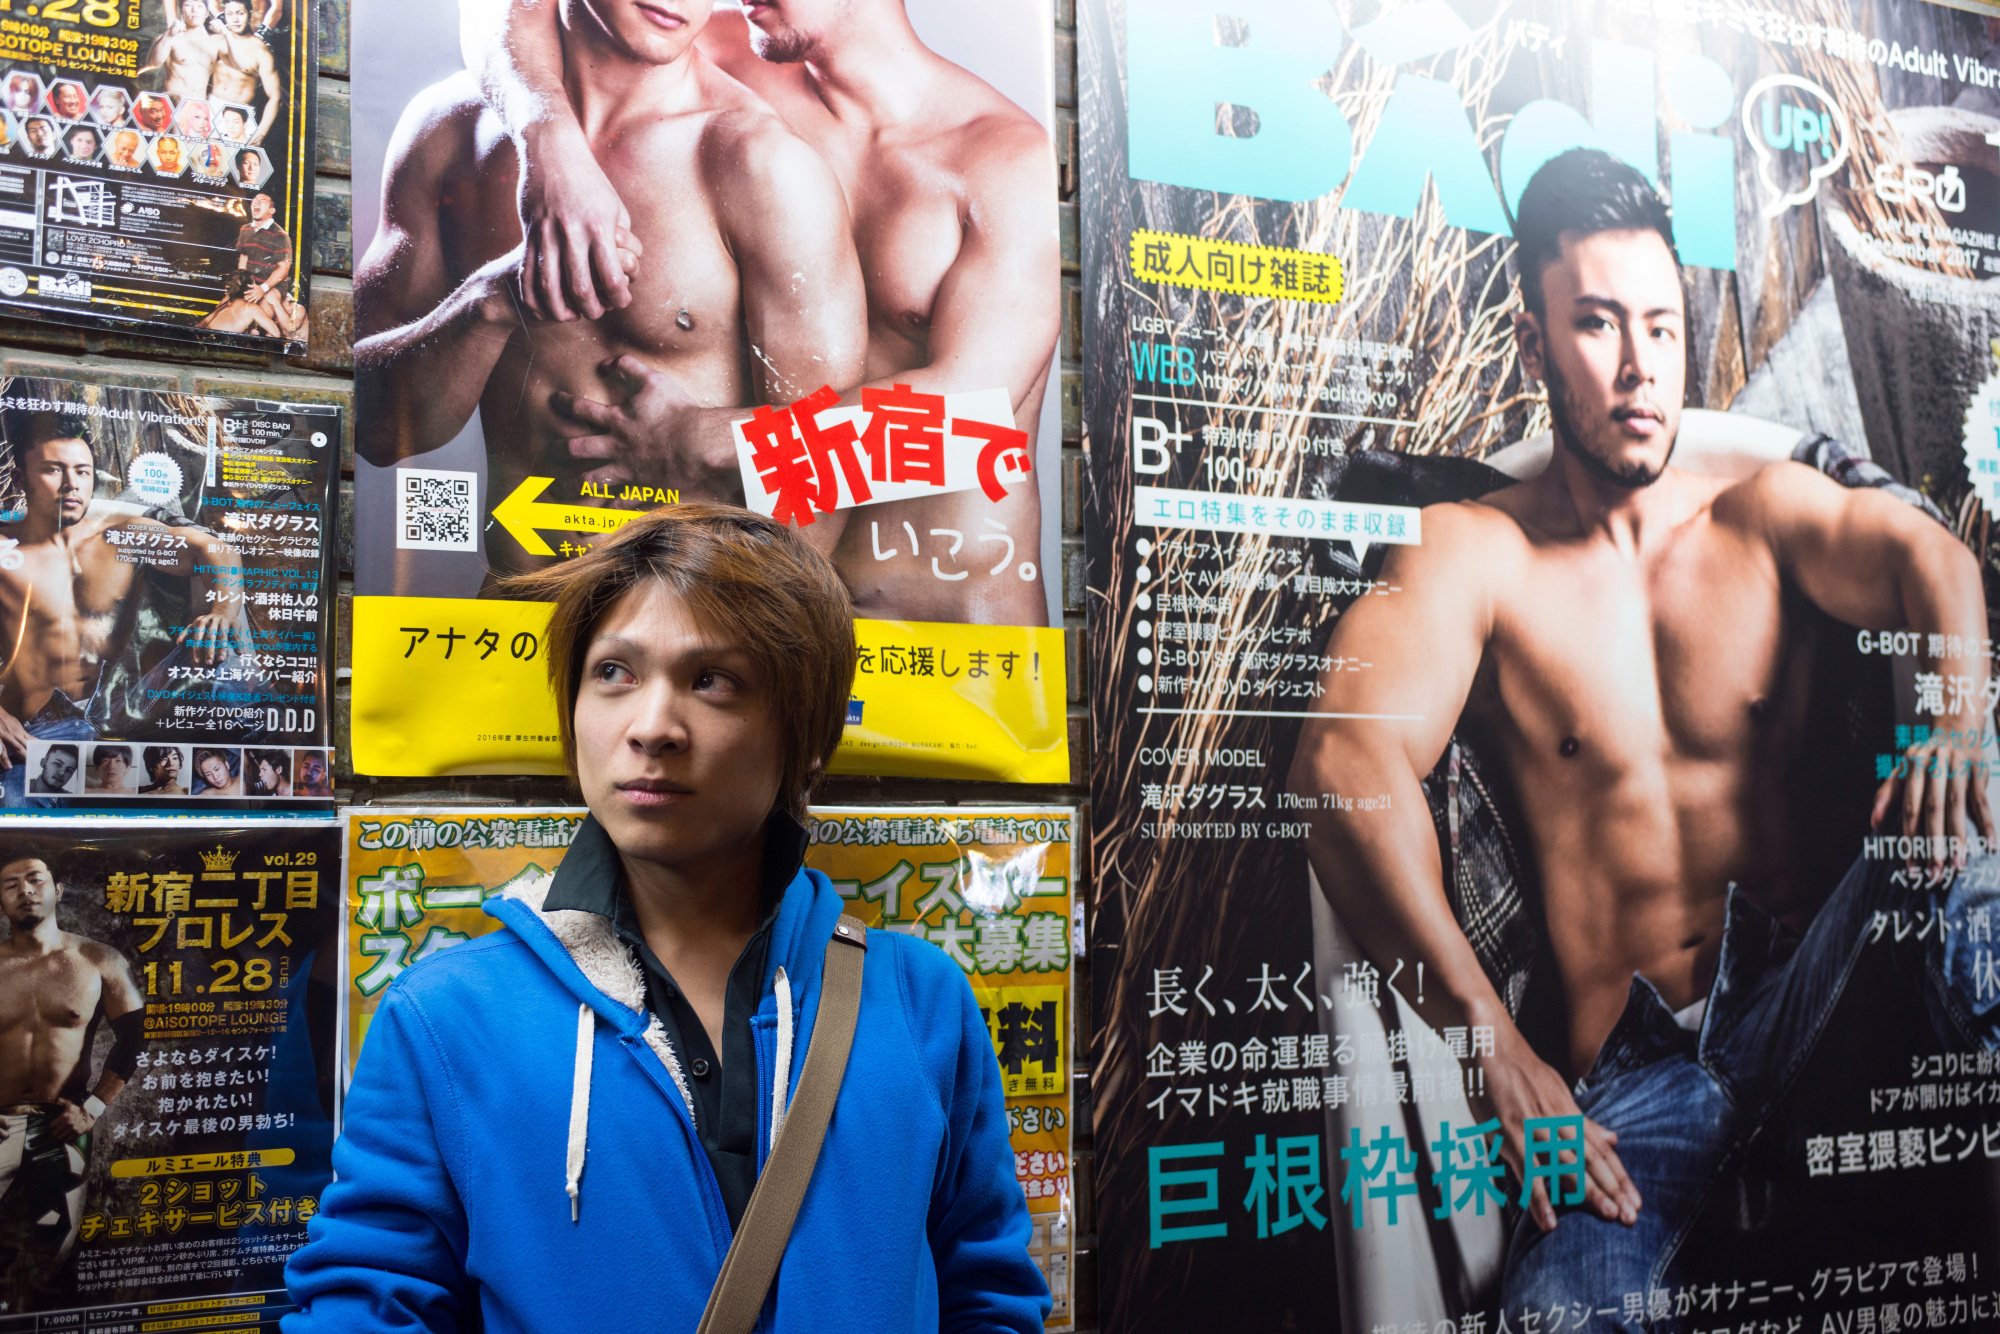 Boys for rent in Tokyo Sex, lies and vulnerable young lives image